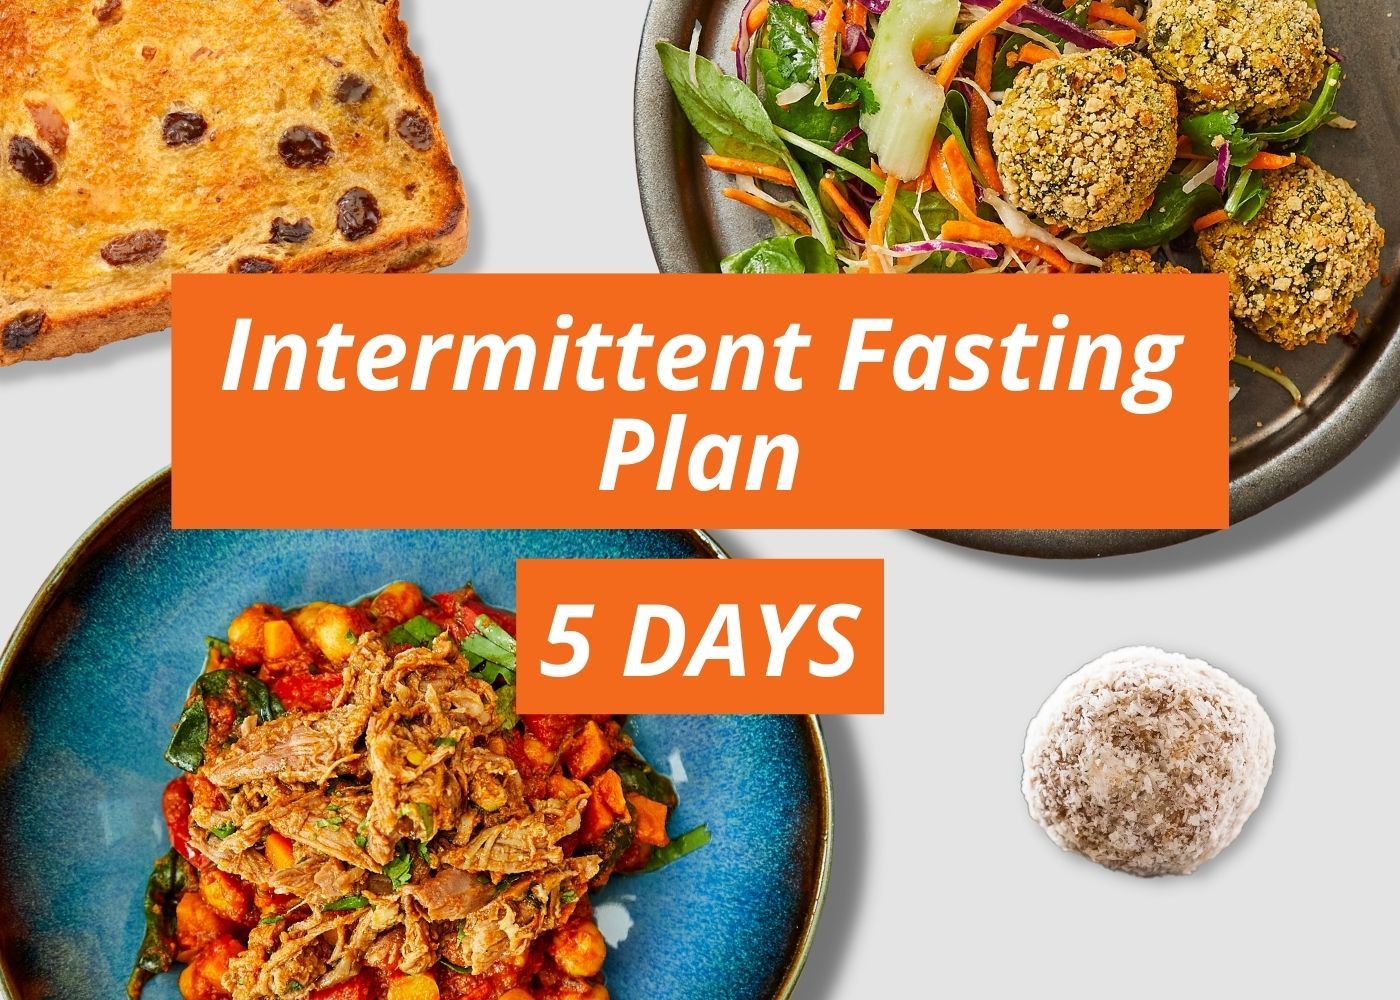 Intermittent Fasting 5 Day - Plan 1